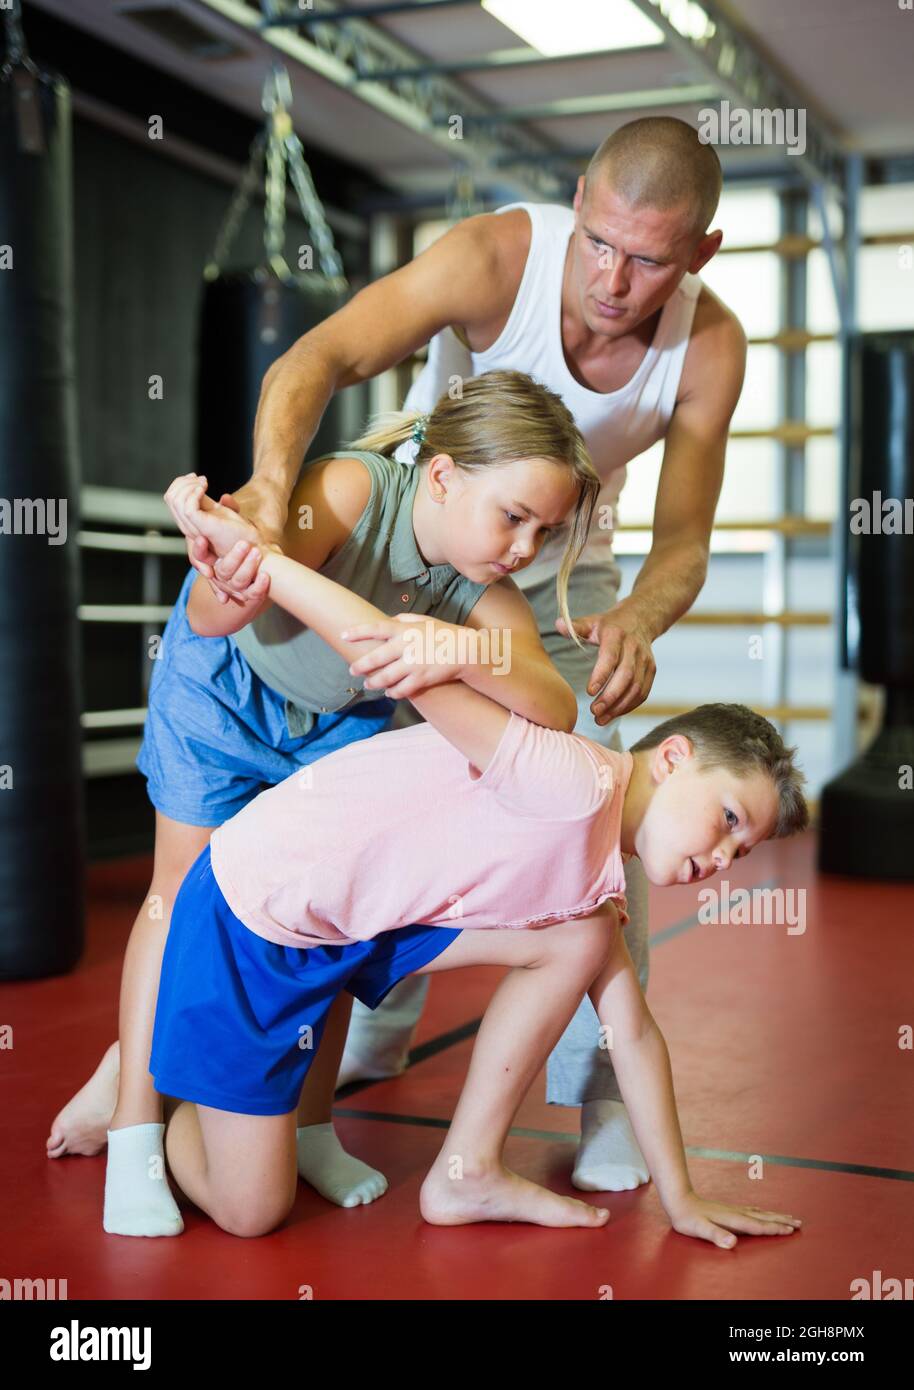 Coach Teaches Children To Apply Self Defense Techniques In The Gym Stock Photo Alamy